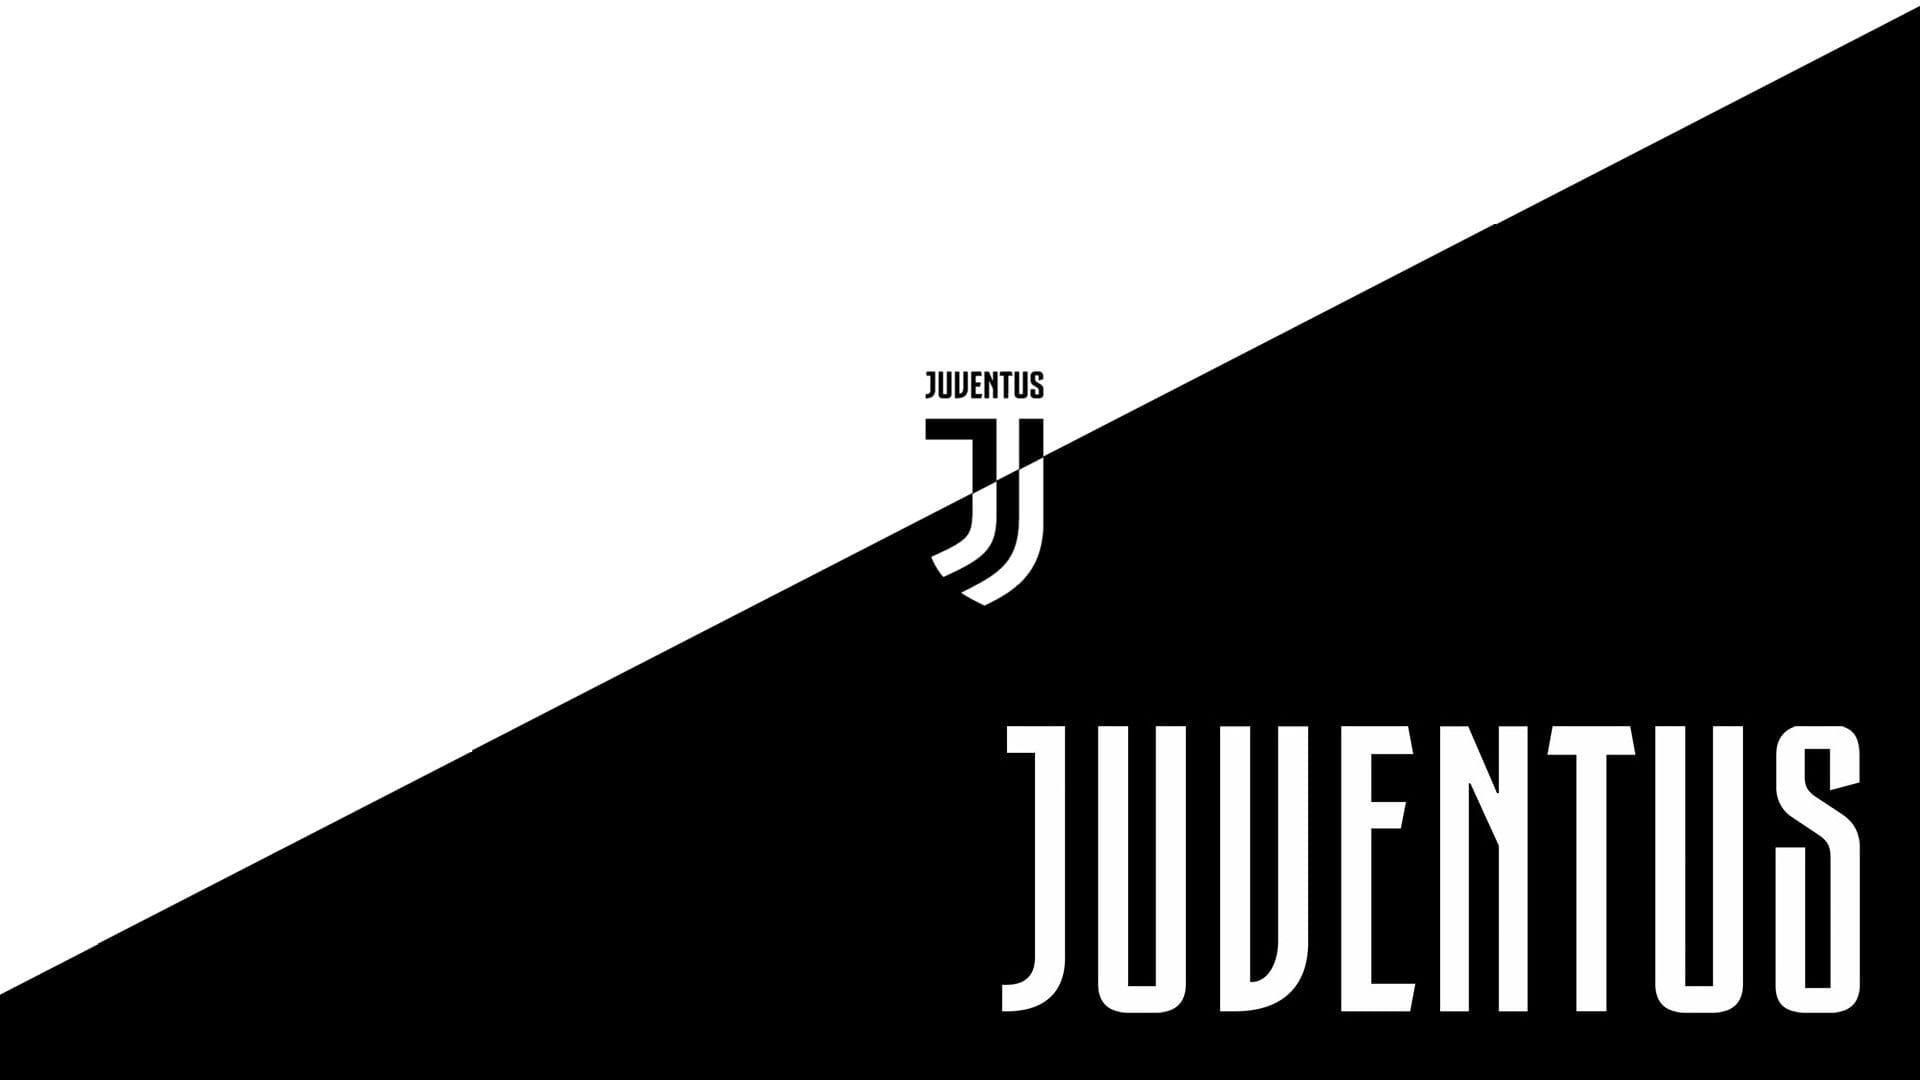 Juventus: One of the five clubs linked to a 2006 Italian football scandal, May 2006. 1920x1080 Full HD Wallpaper.